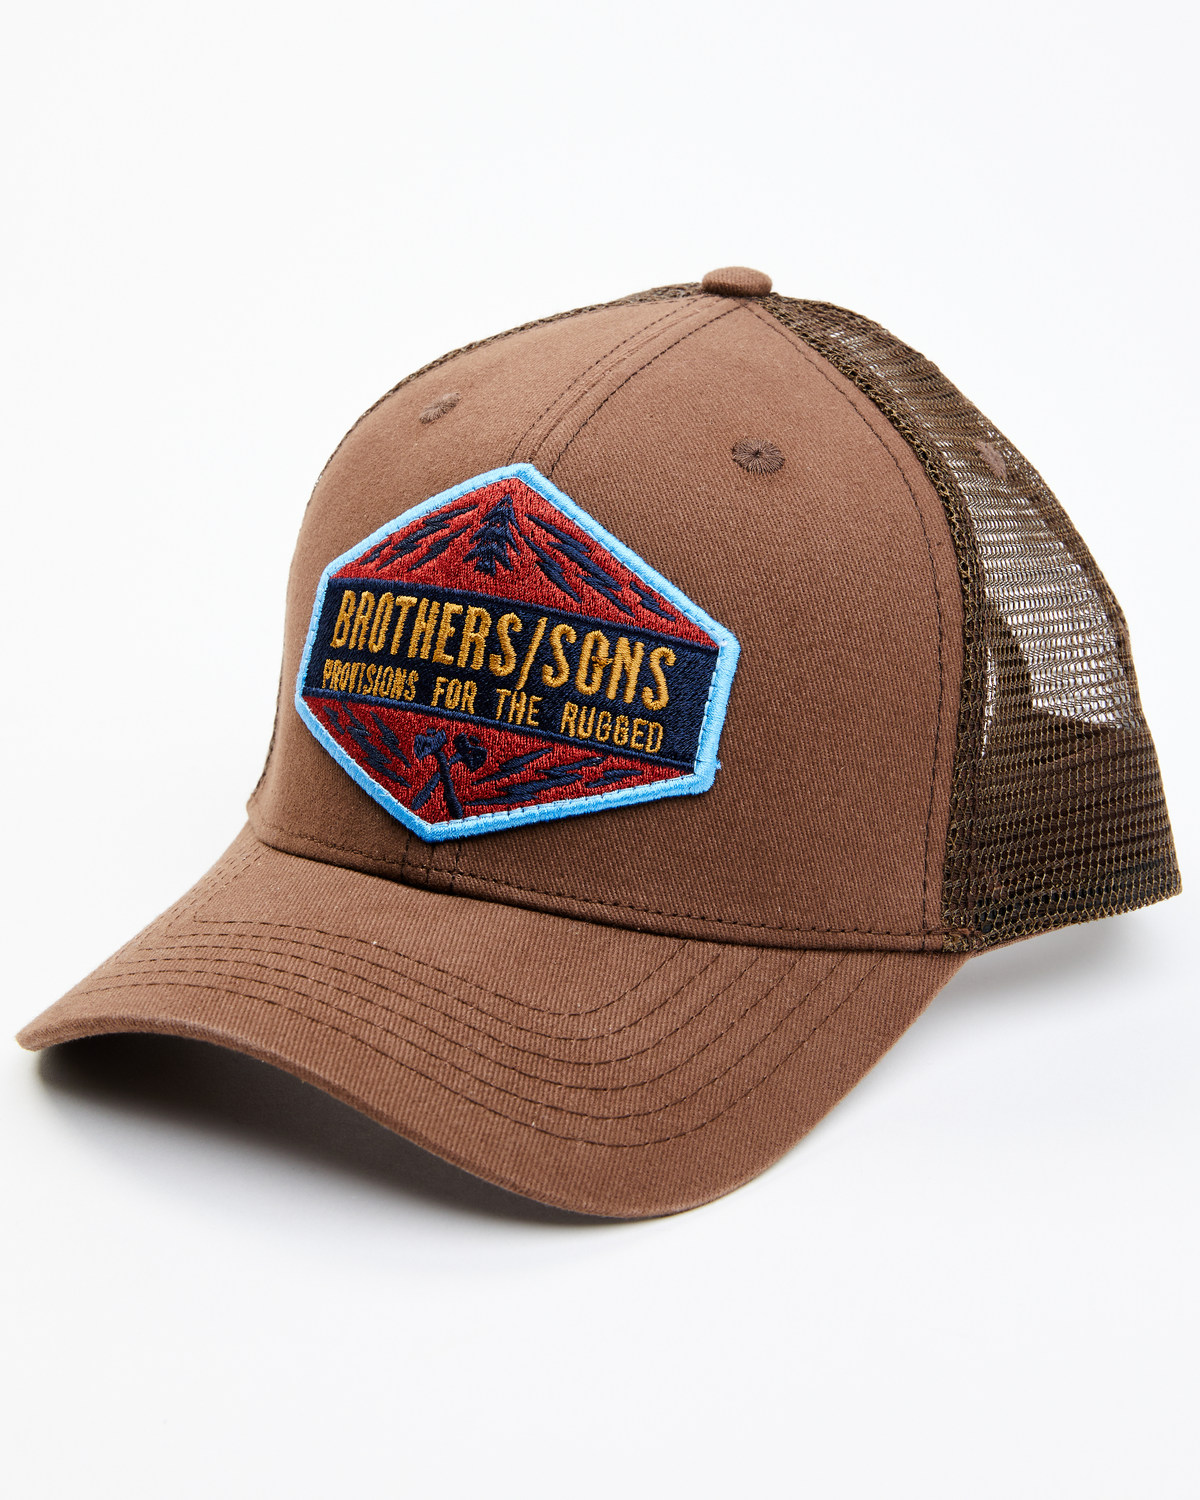 Brothers and Sons Men's Rugged Patch Ball Cap